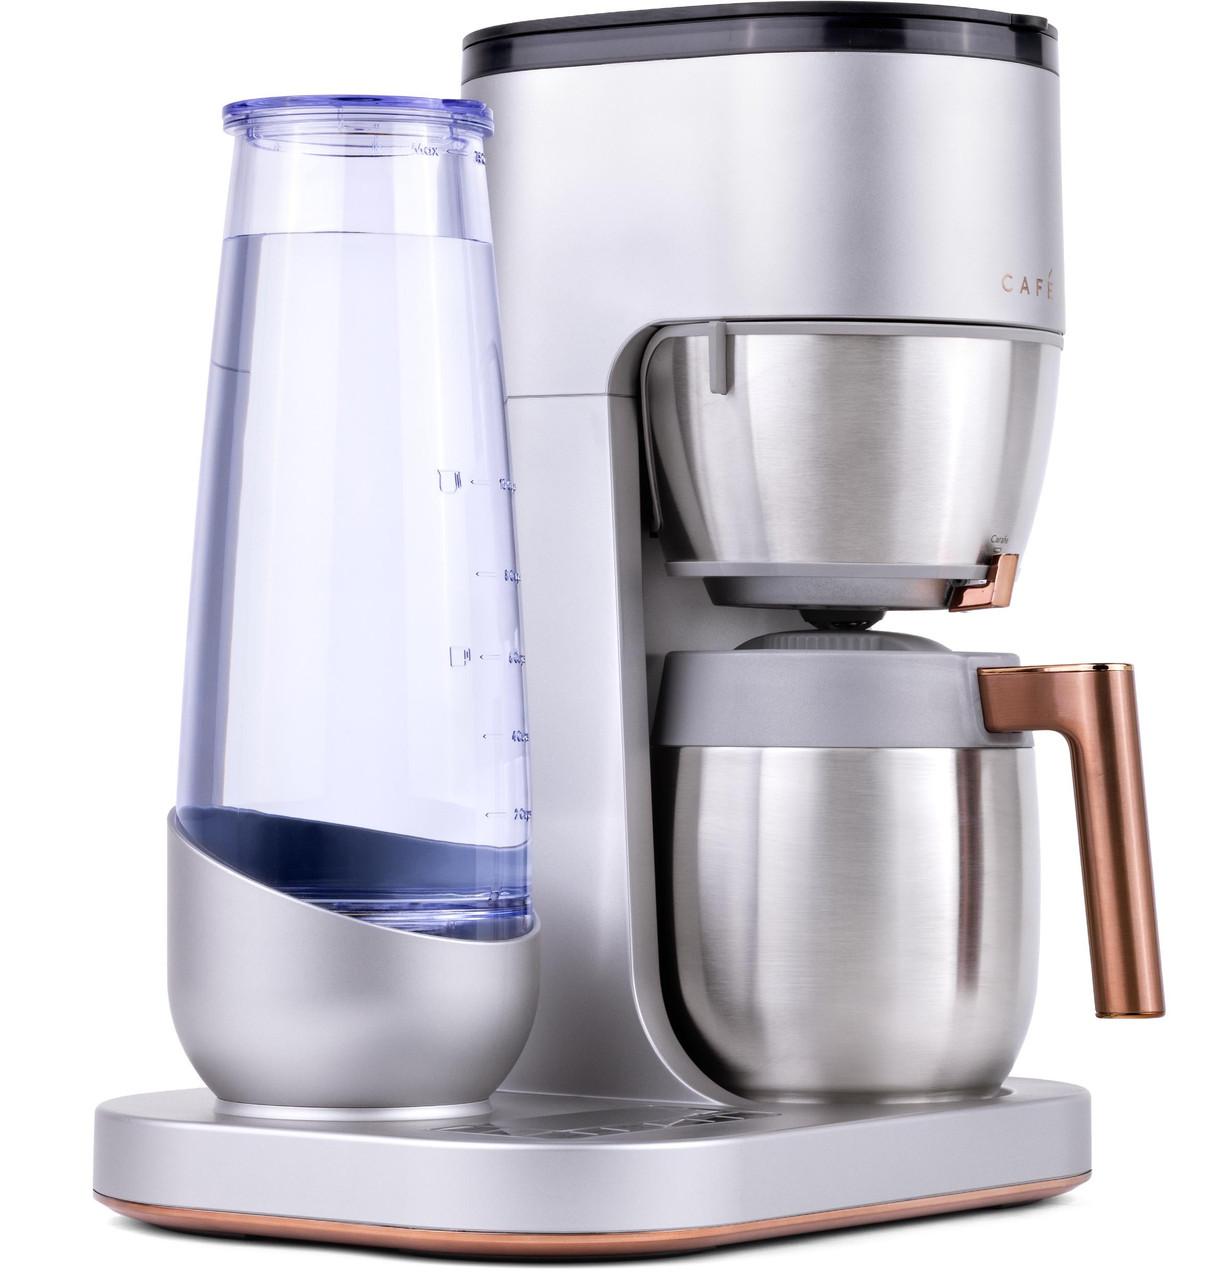 Top Rated Thermal Coffee Carafe with Premium Stainless Steel by Pykal 